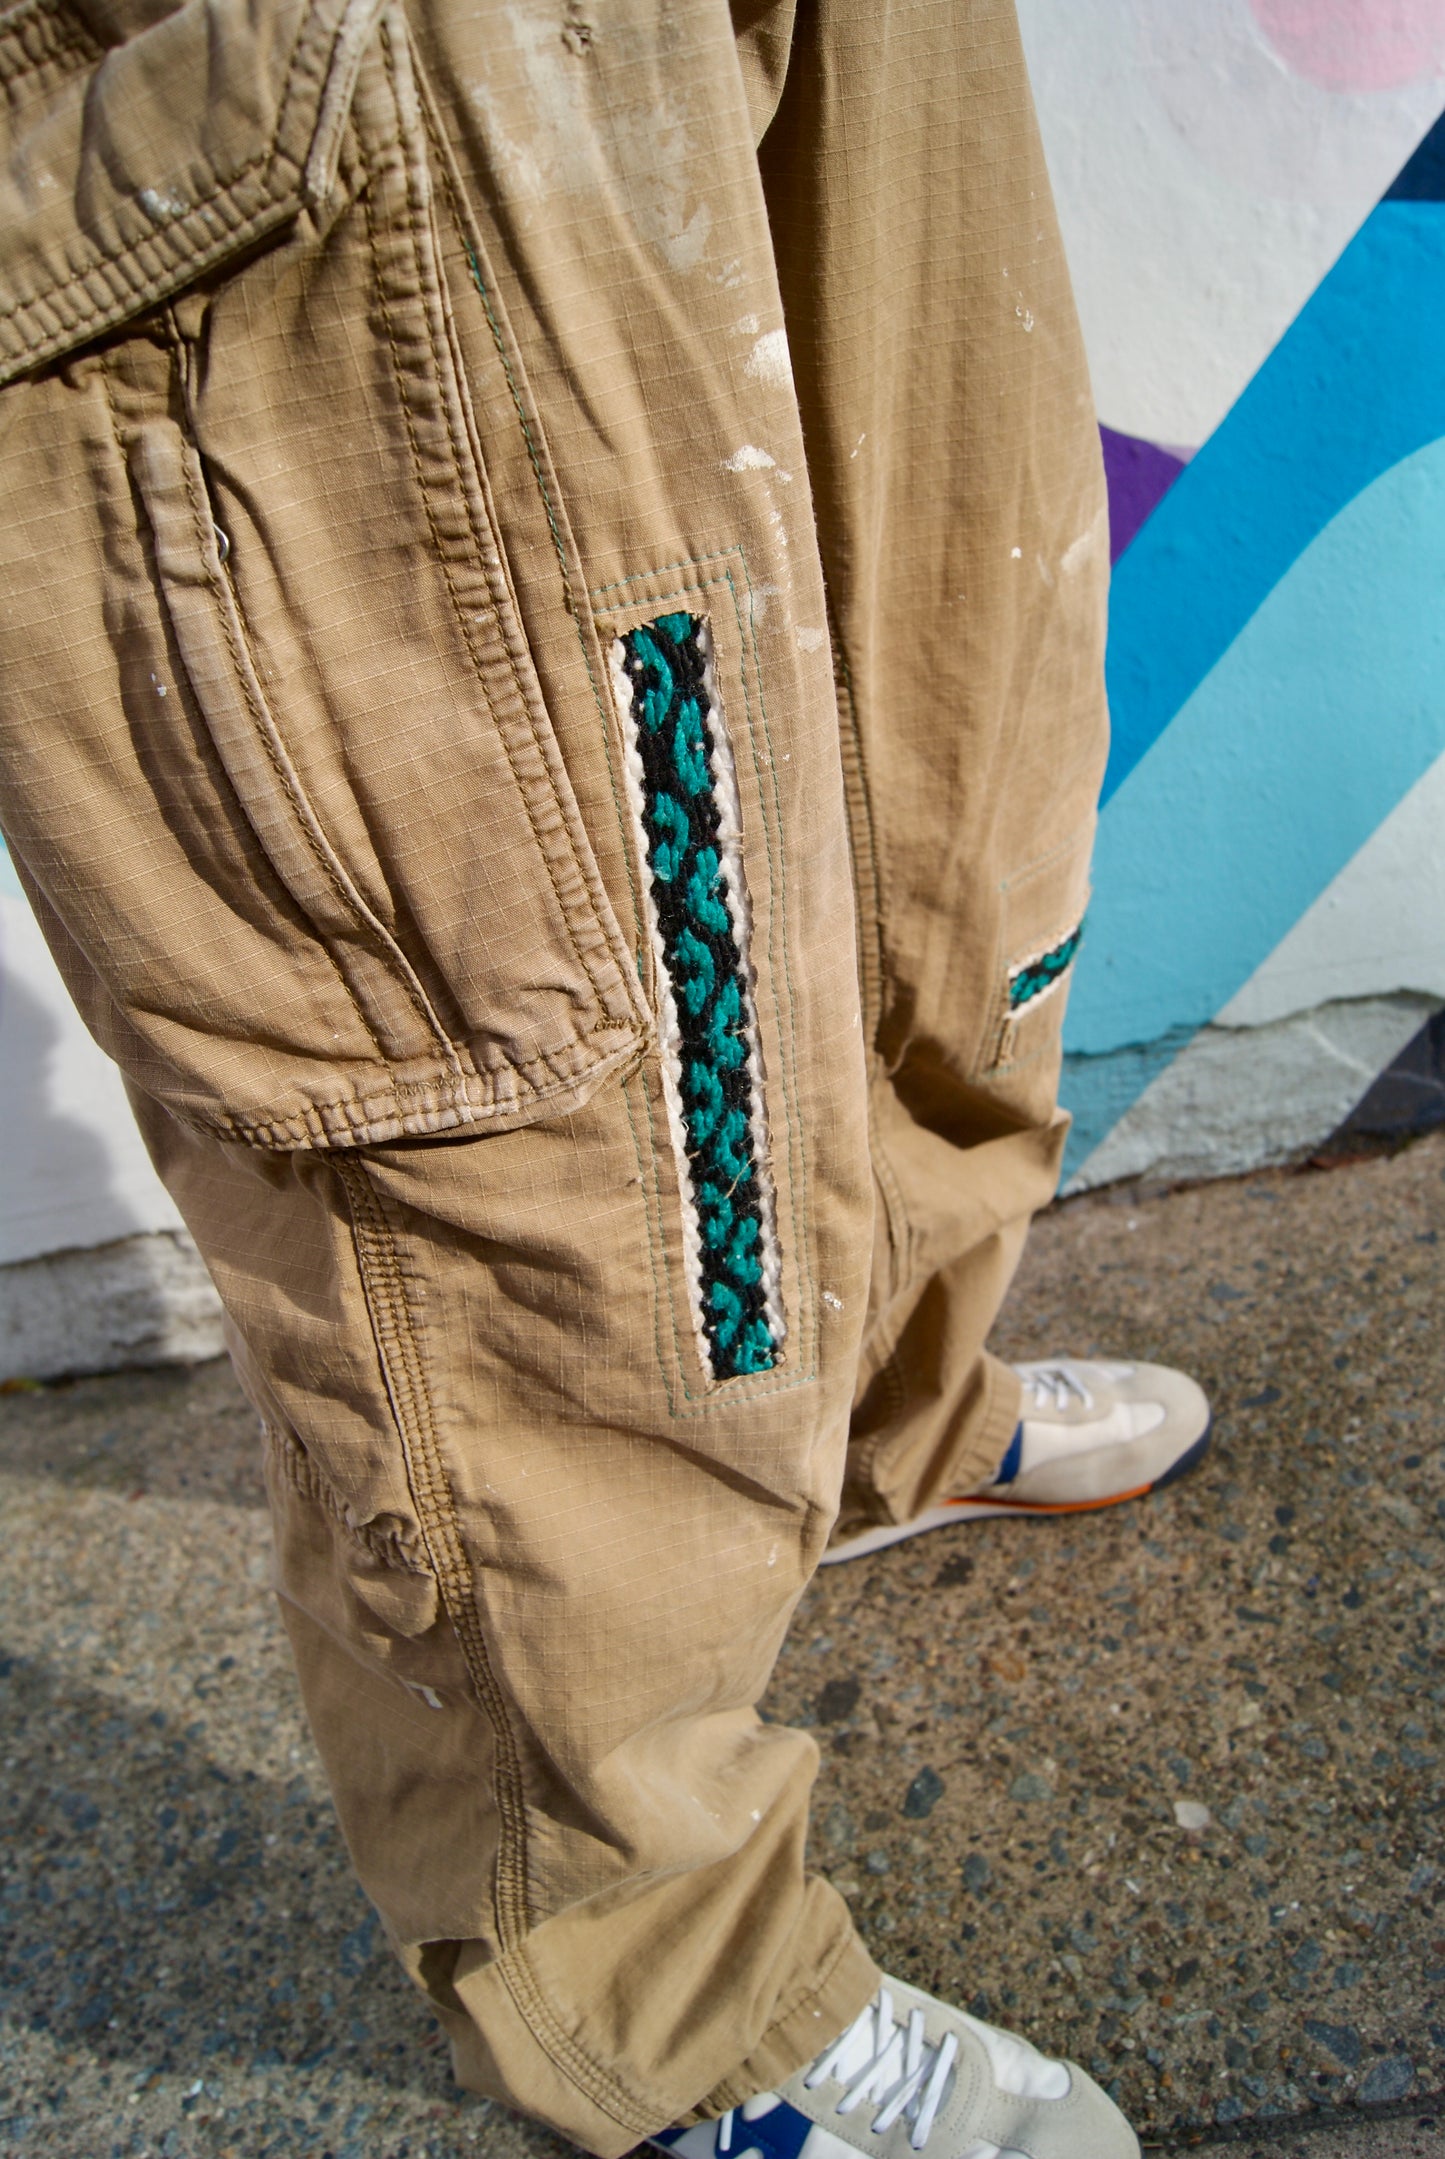 The Painter Pant (custom-mended)